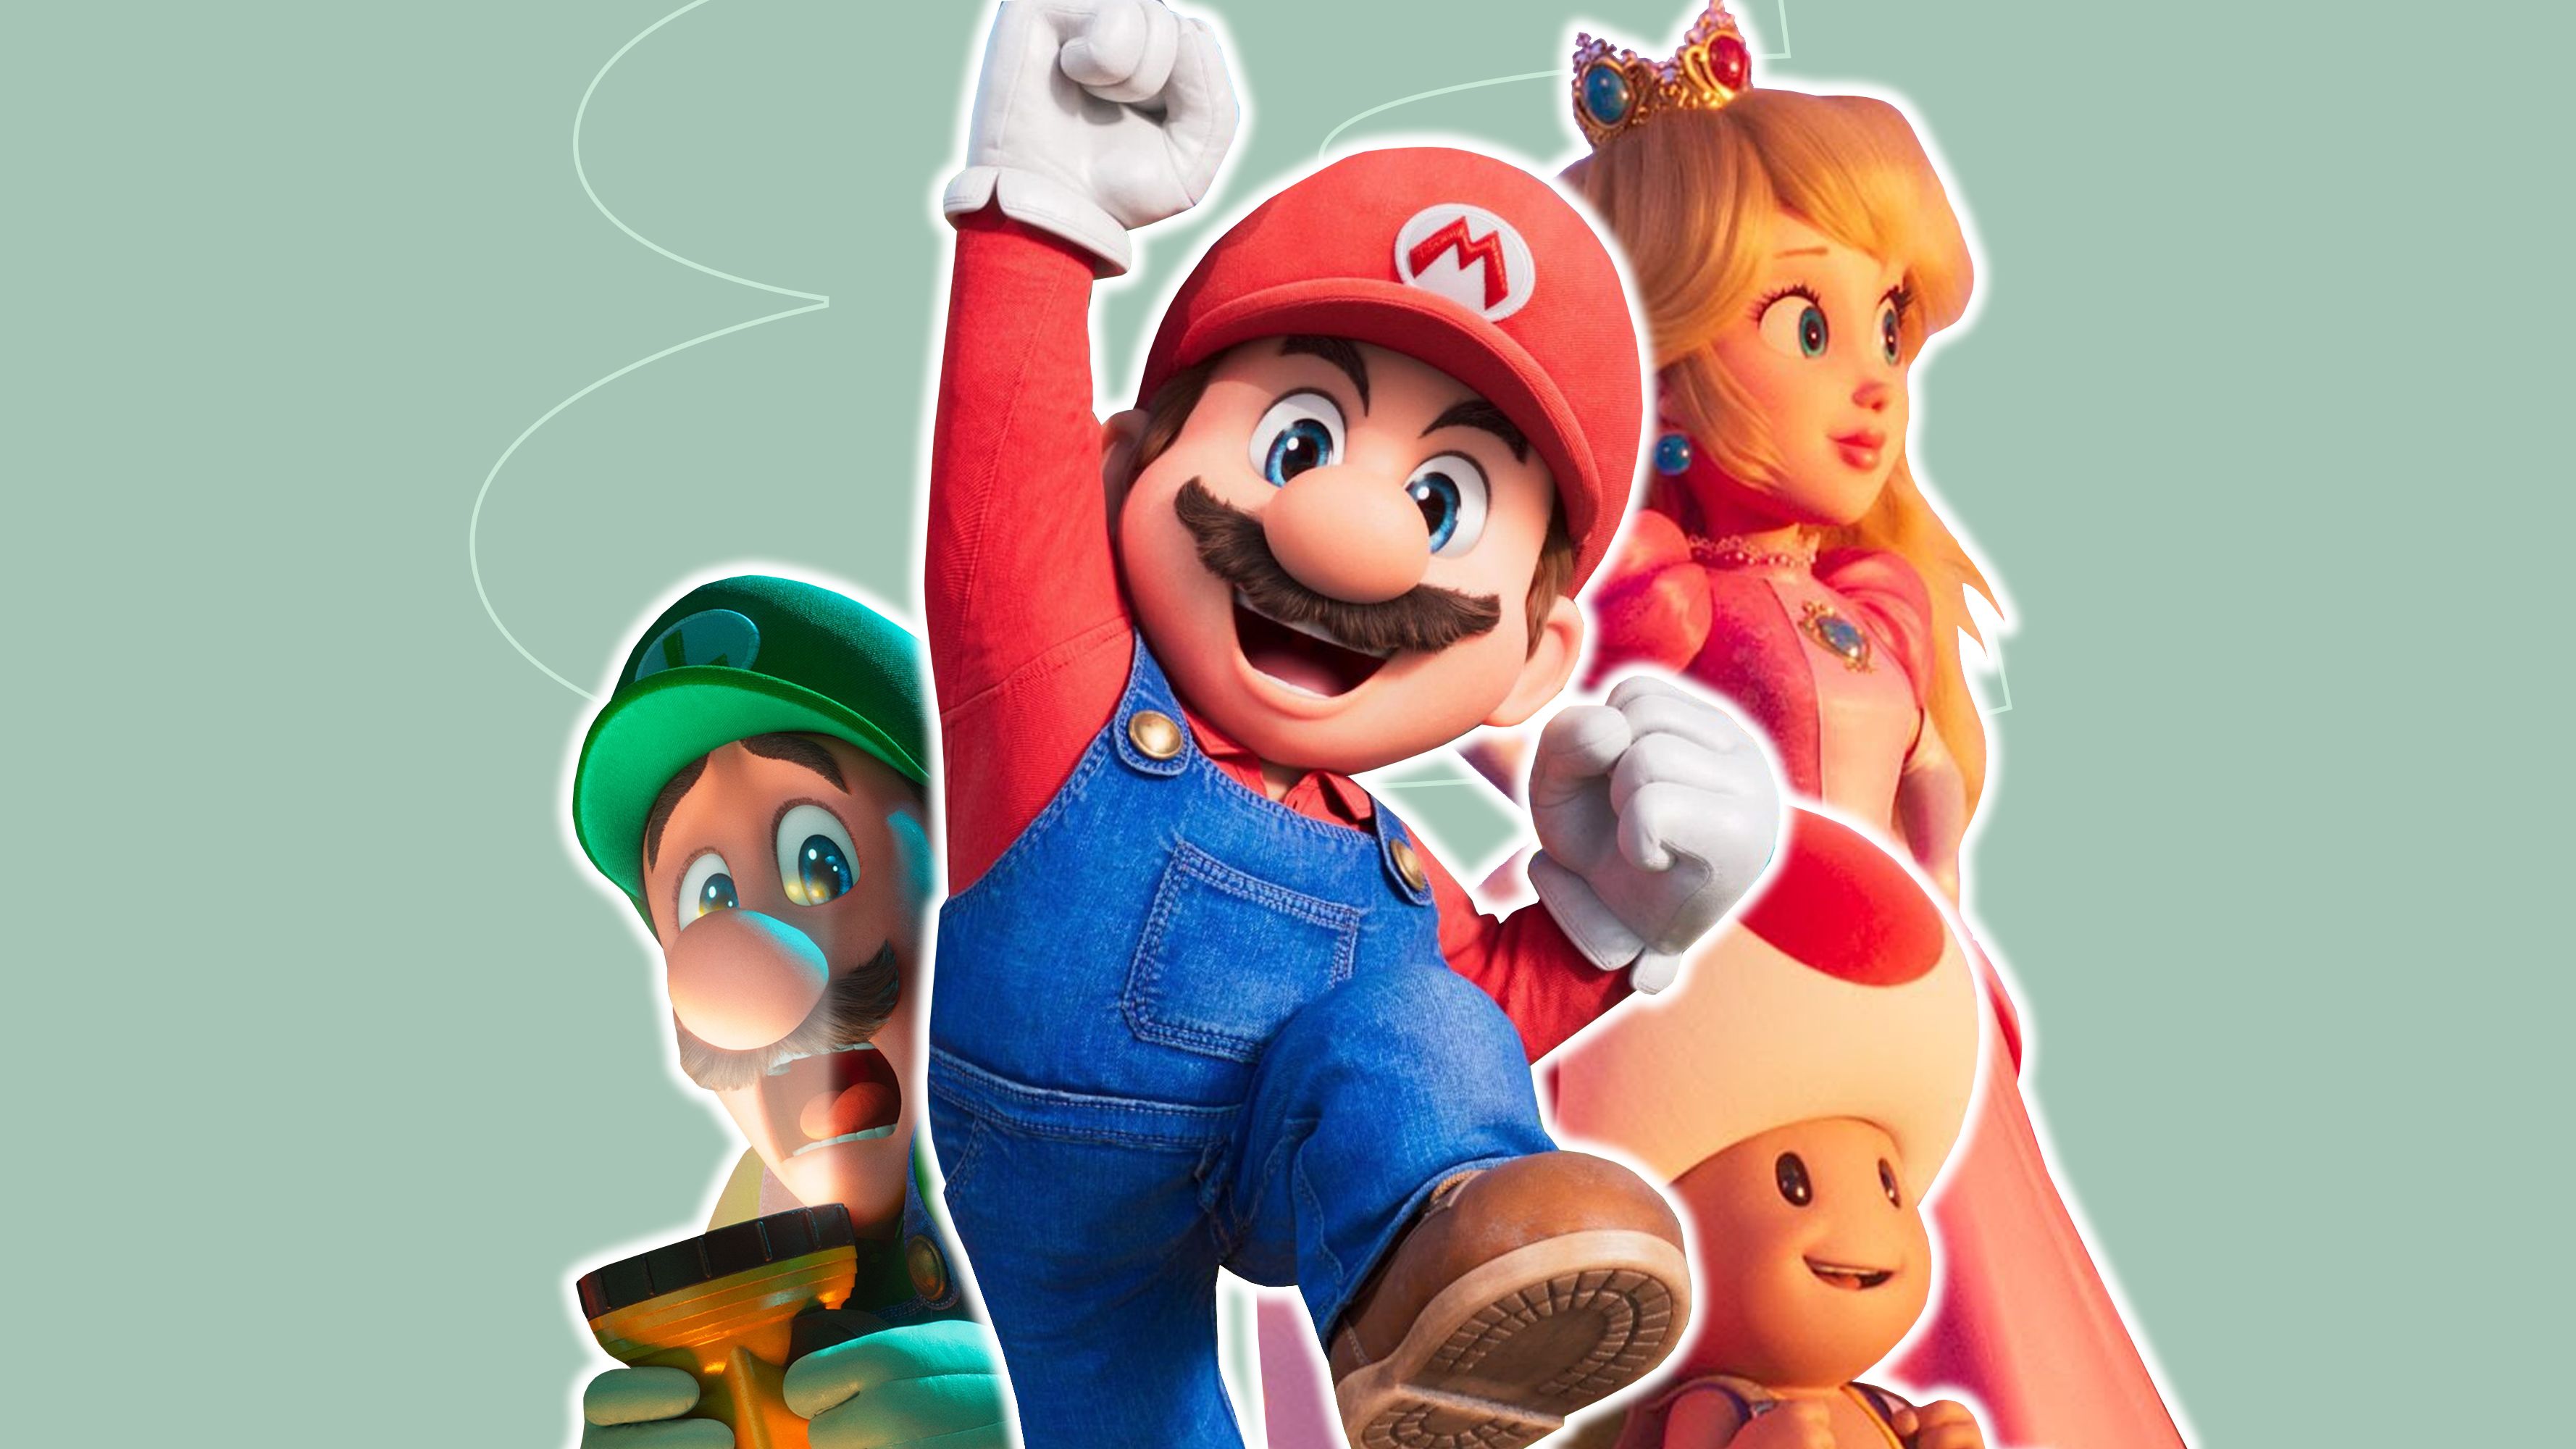 Who Are Mario And Luigi's Parents?